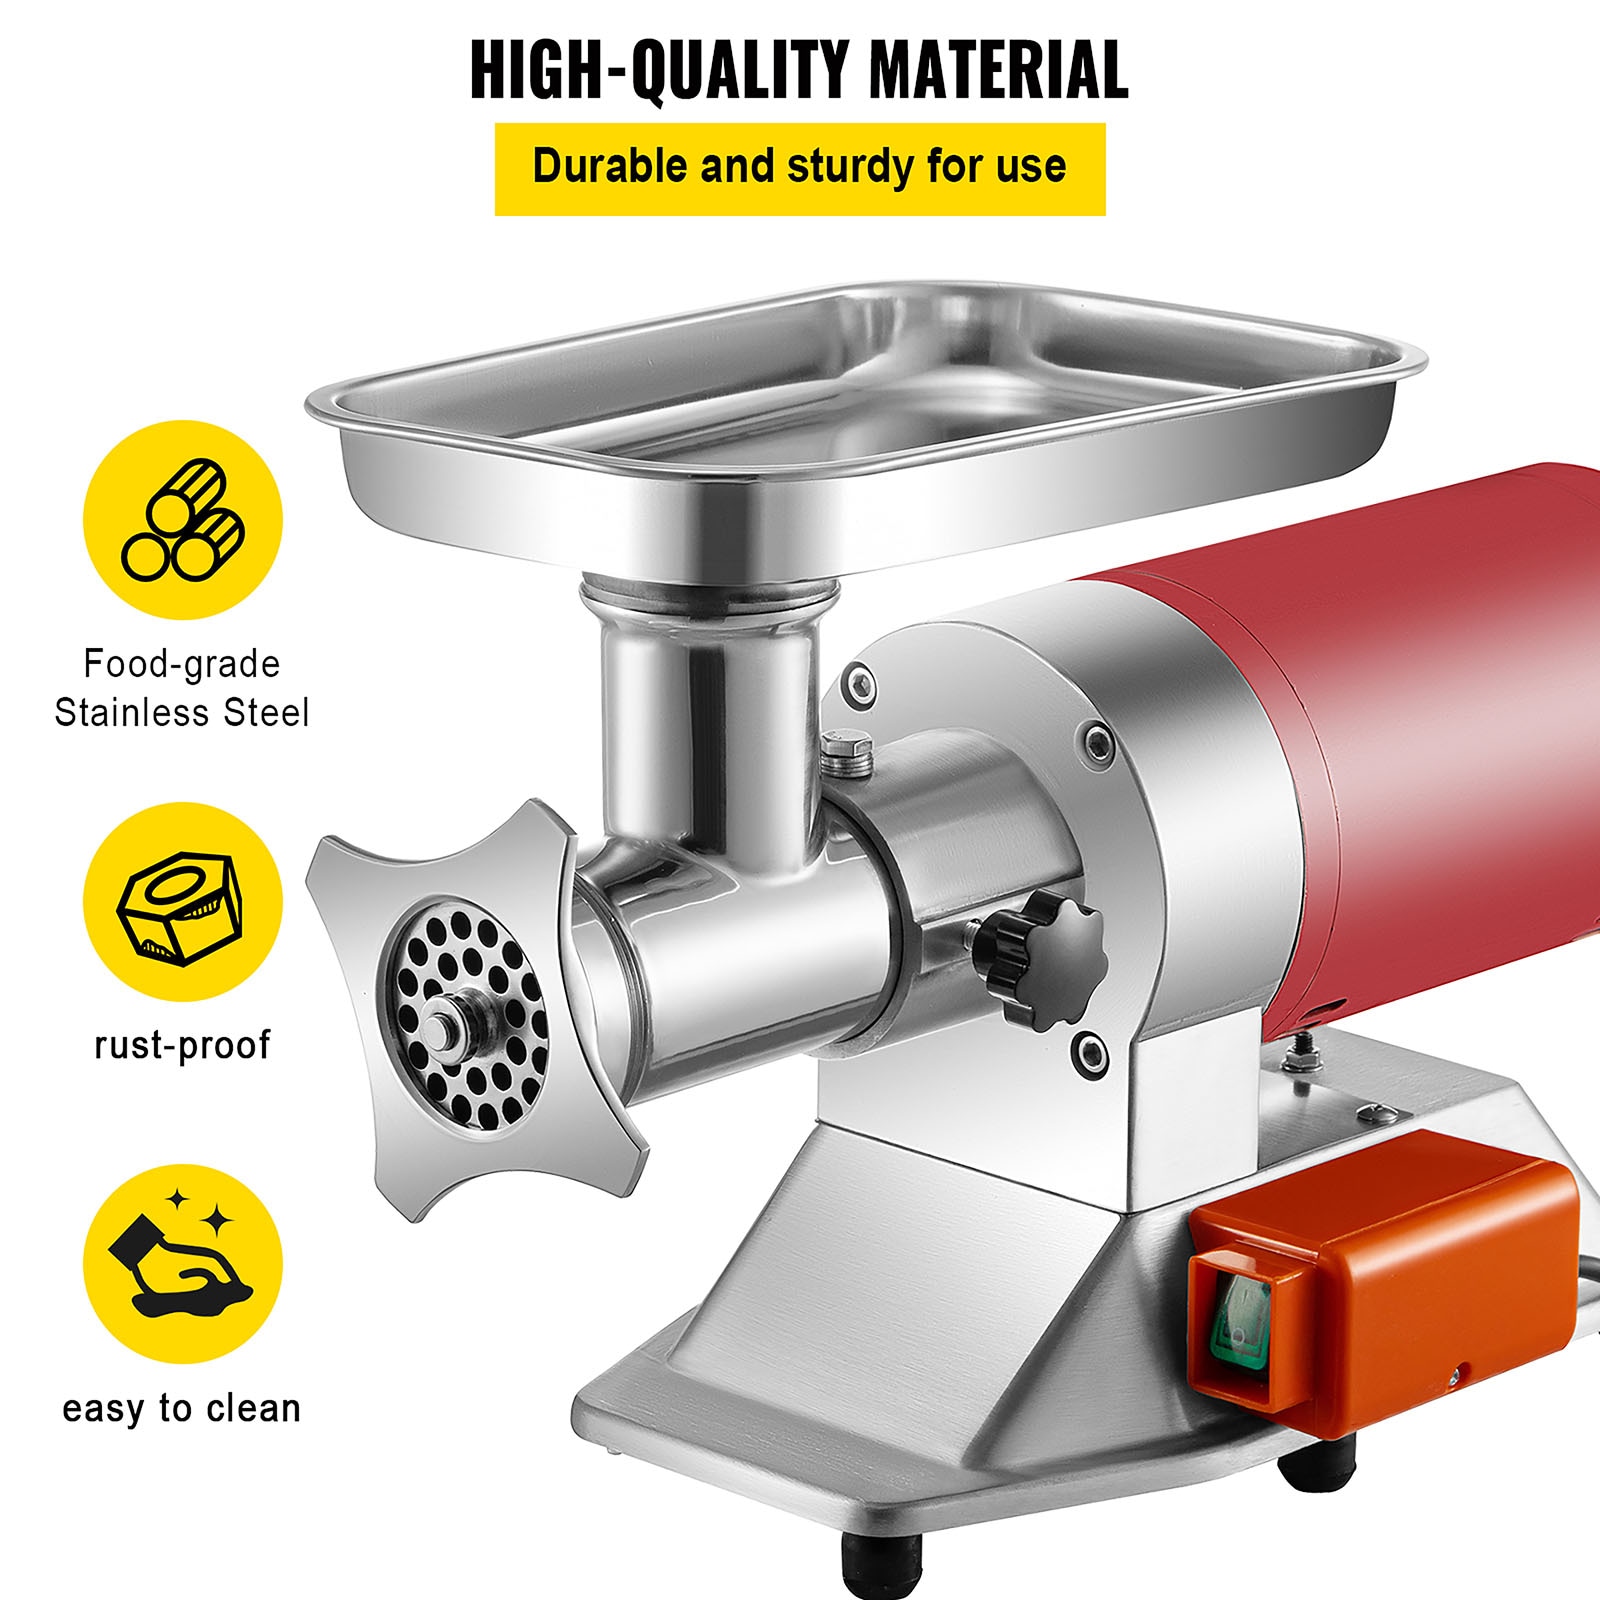 Simple Deluxe Electric Meat Grinder Heavy Duty Meat Mincer Food Grinder with Sausage & Kubbe Kit 3 Grinder Plates 600W Power Easy to Clean and Ins